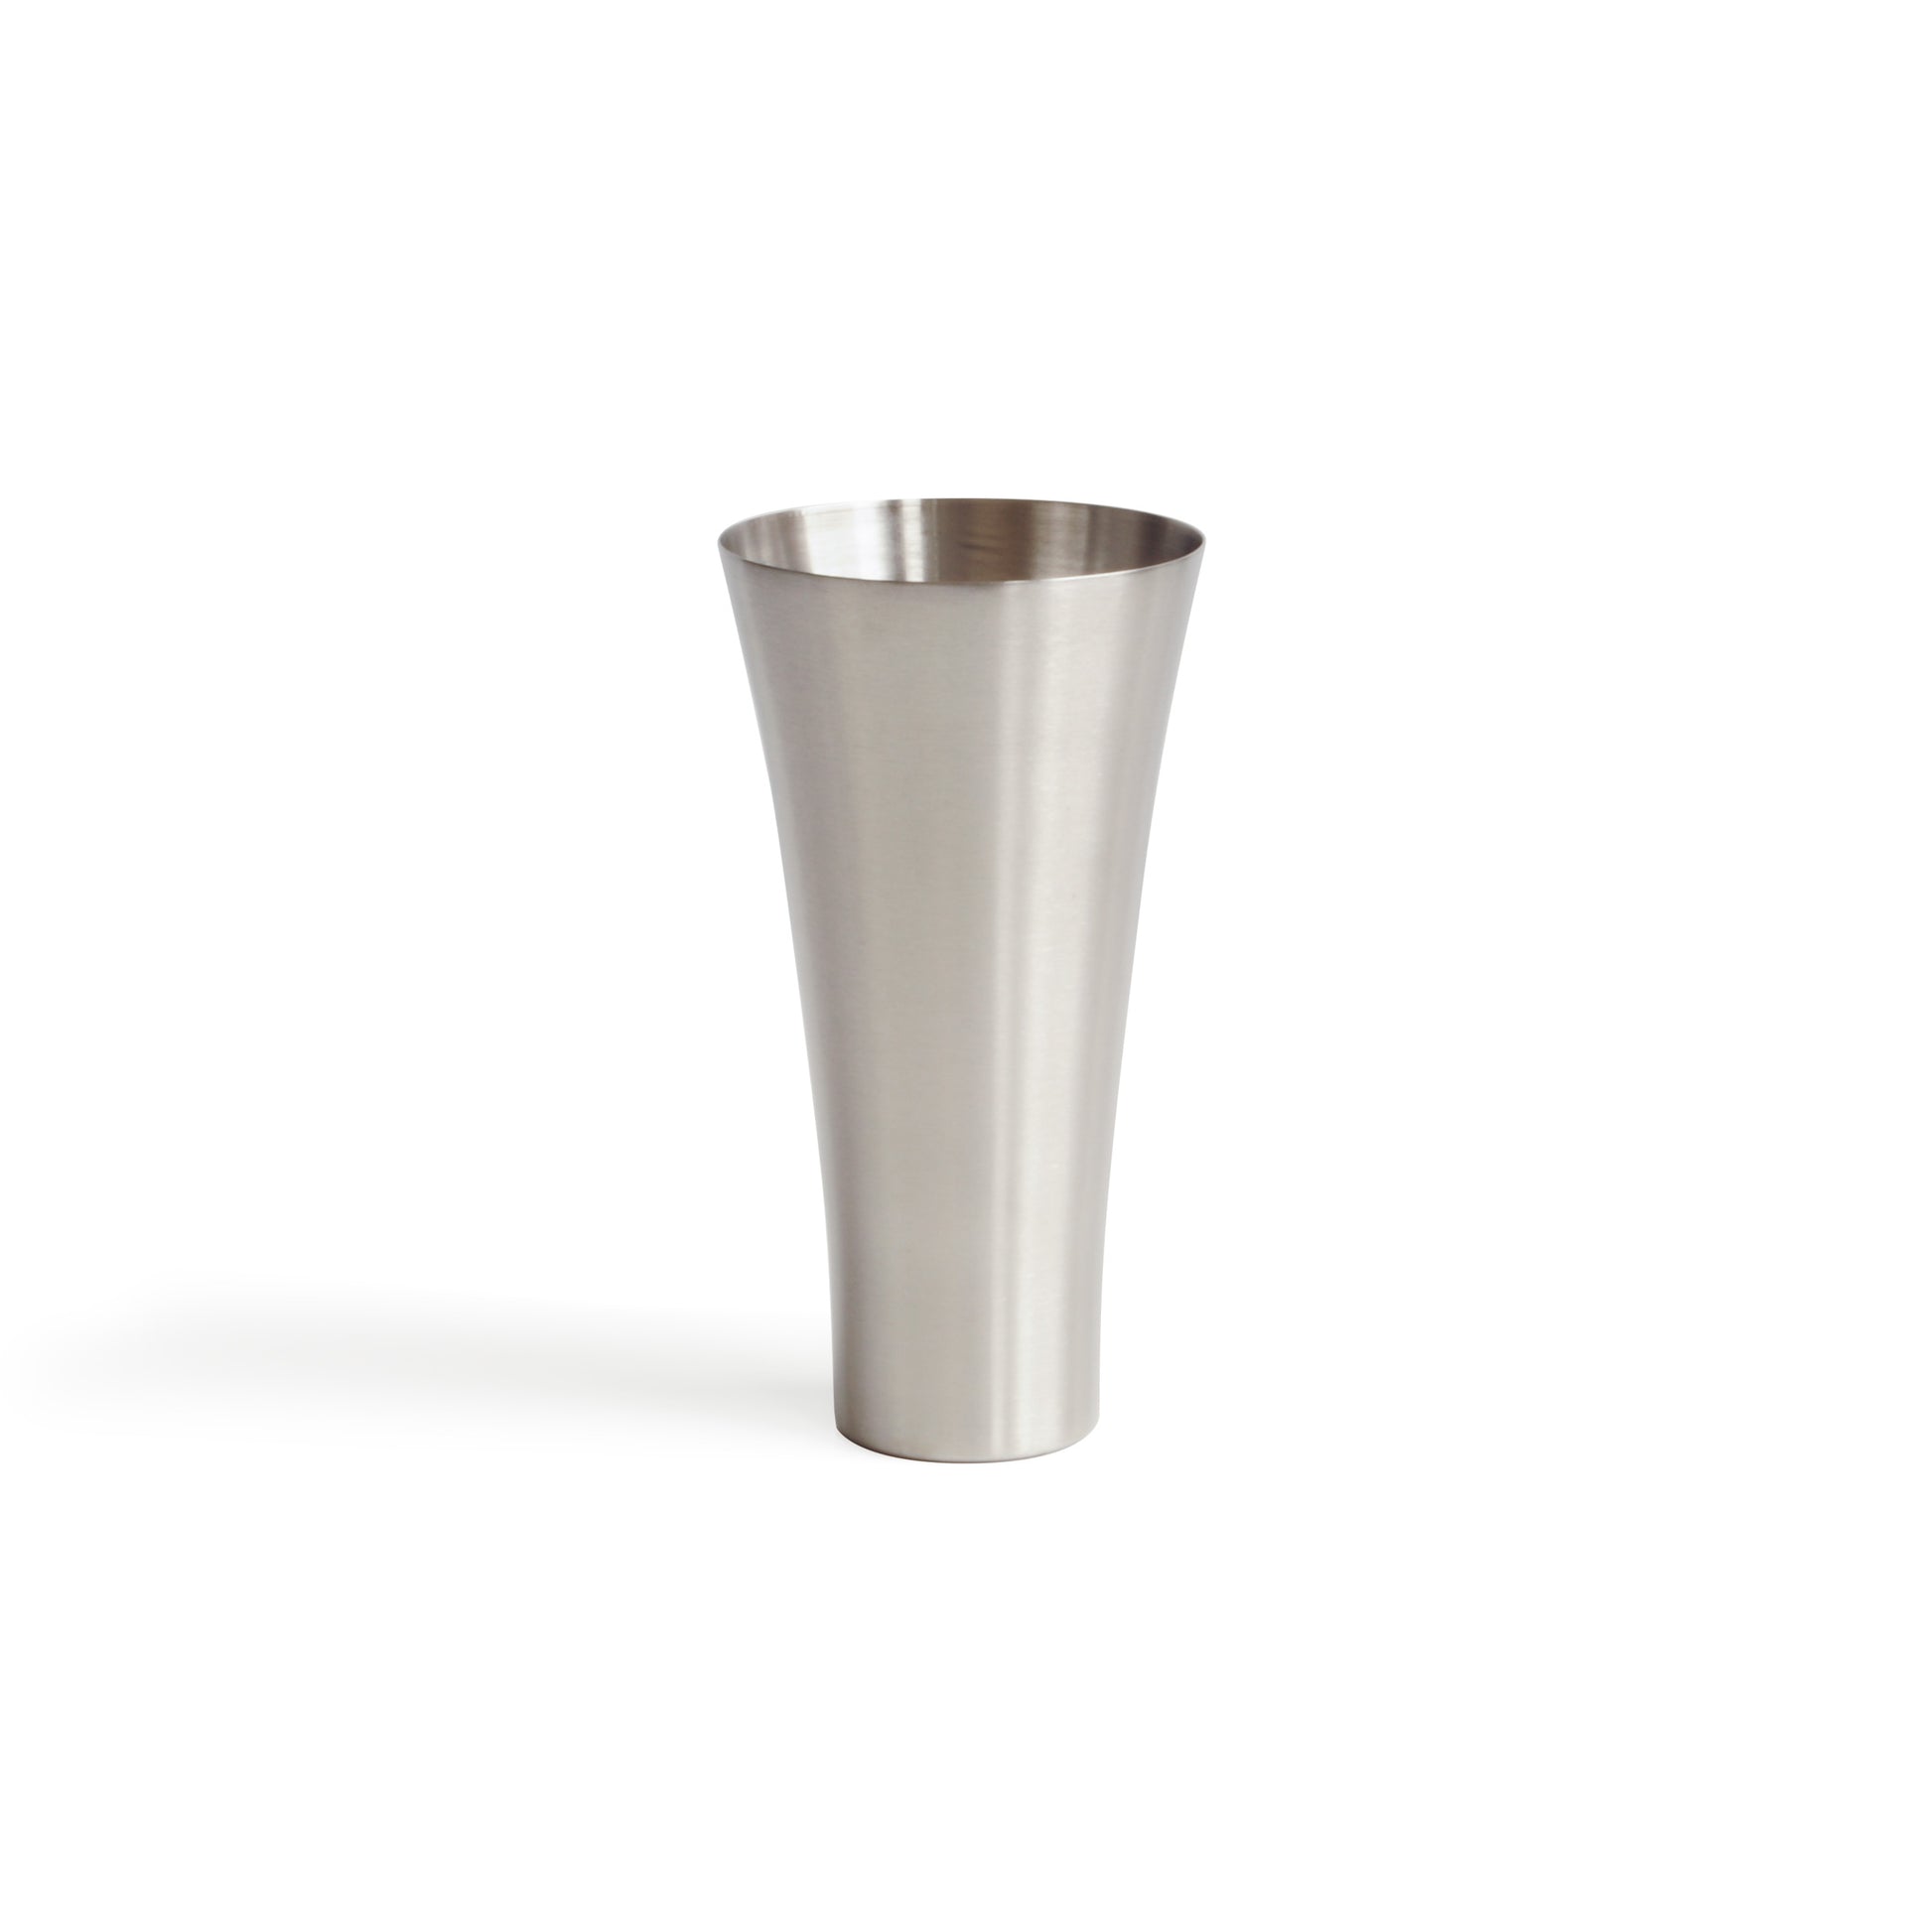 SWIZZLE CUP – STAINLESS STEEL / 14oz (414ml) – Cocktail Kingdom